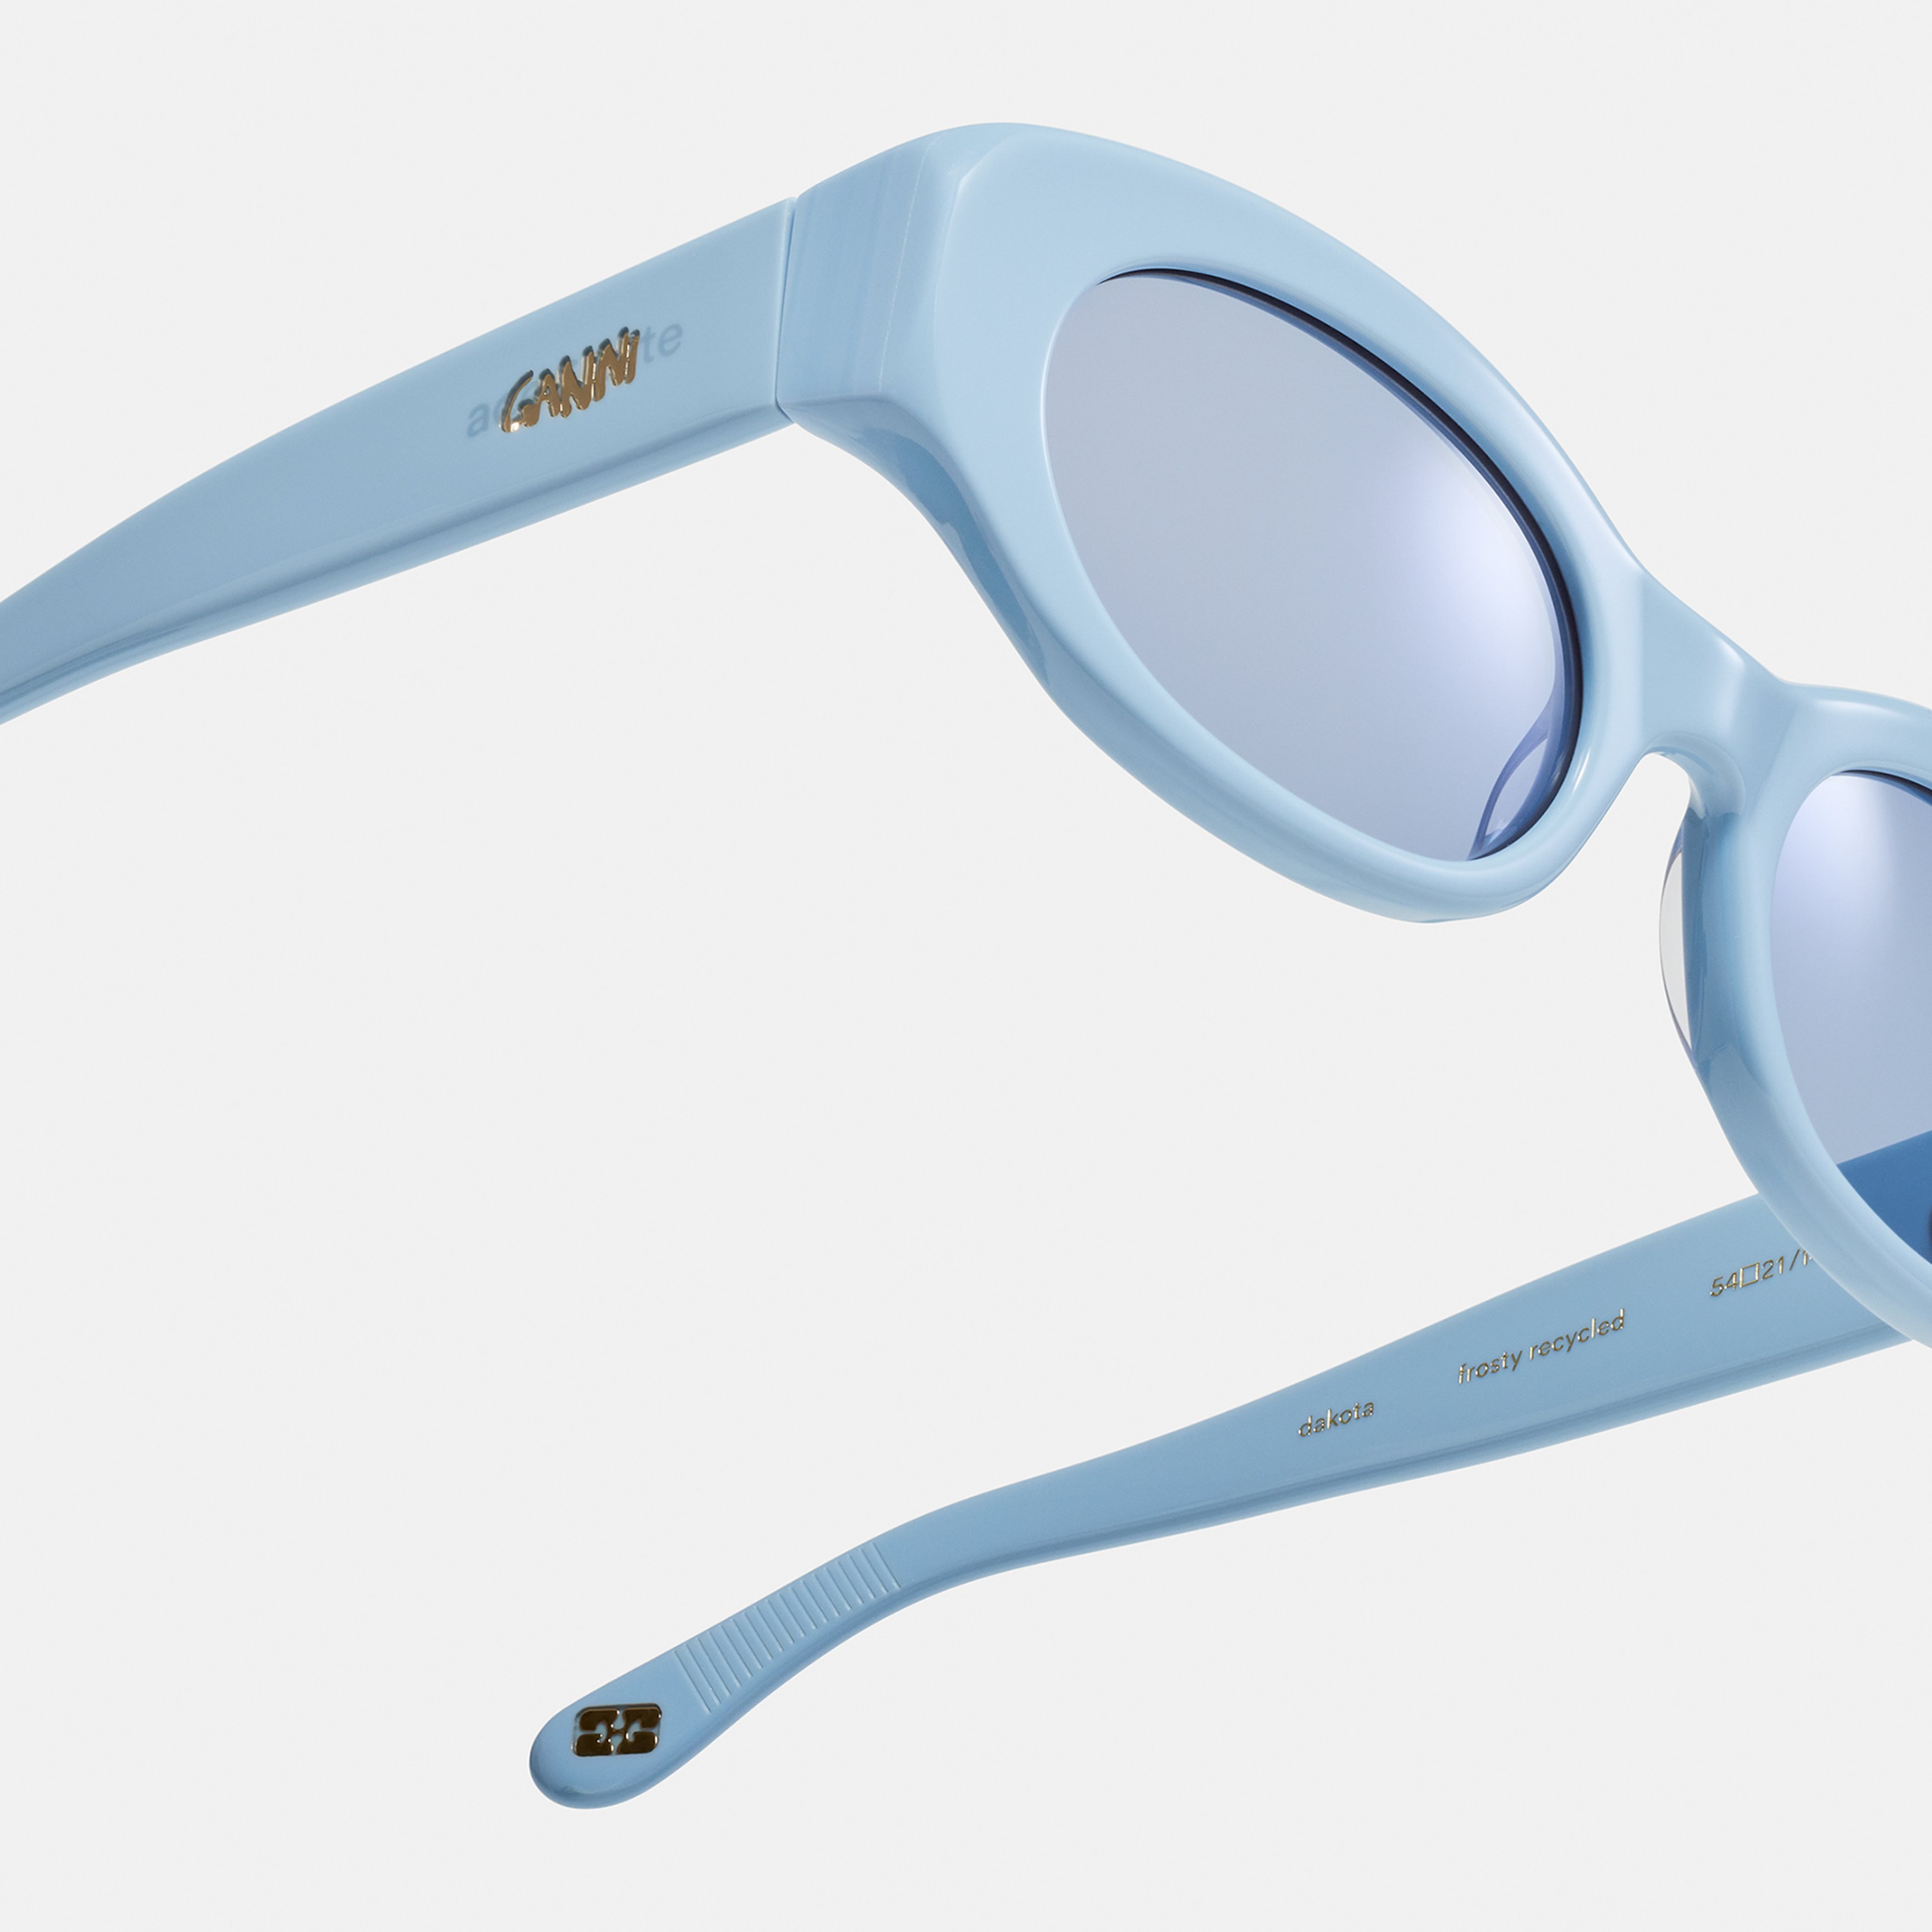 Ace & Tate Solaires | oval recyclé in Bleu